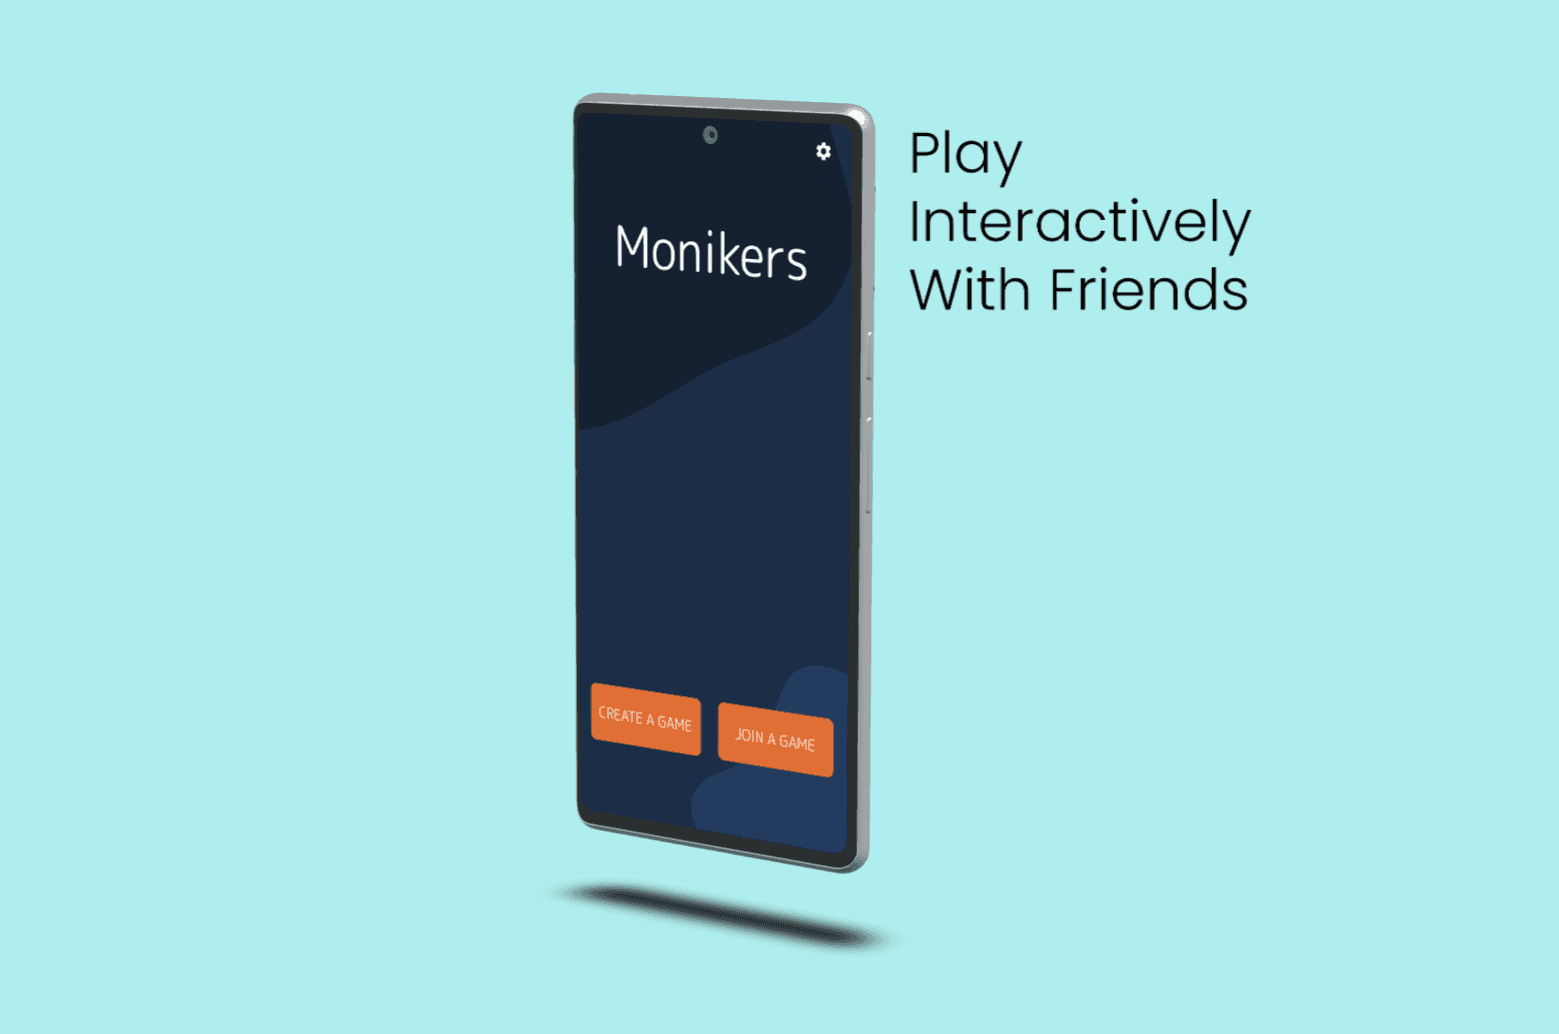 Monikers app picture. Phone next to text reading "Play Interactively with Friends".